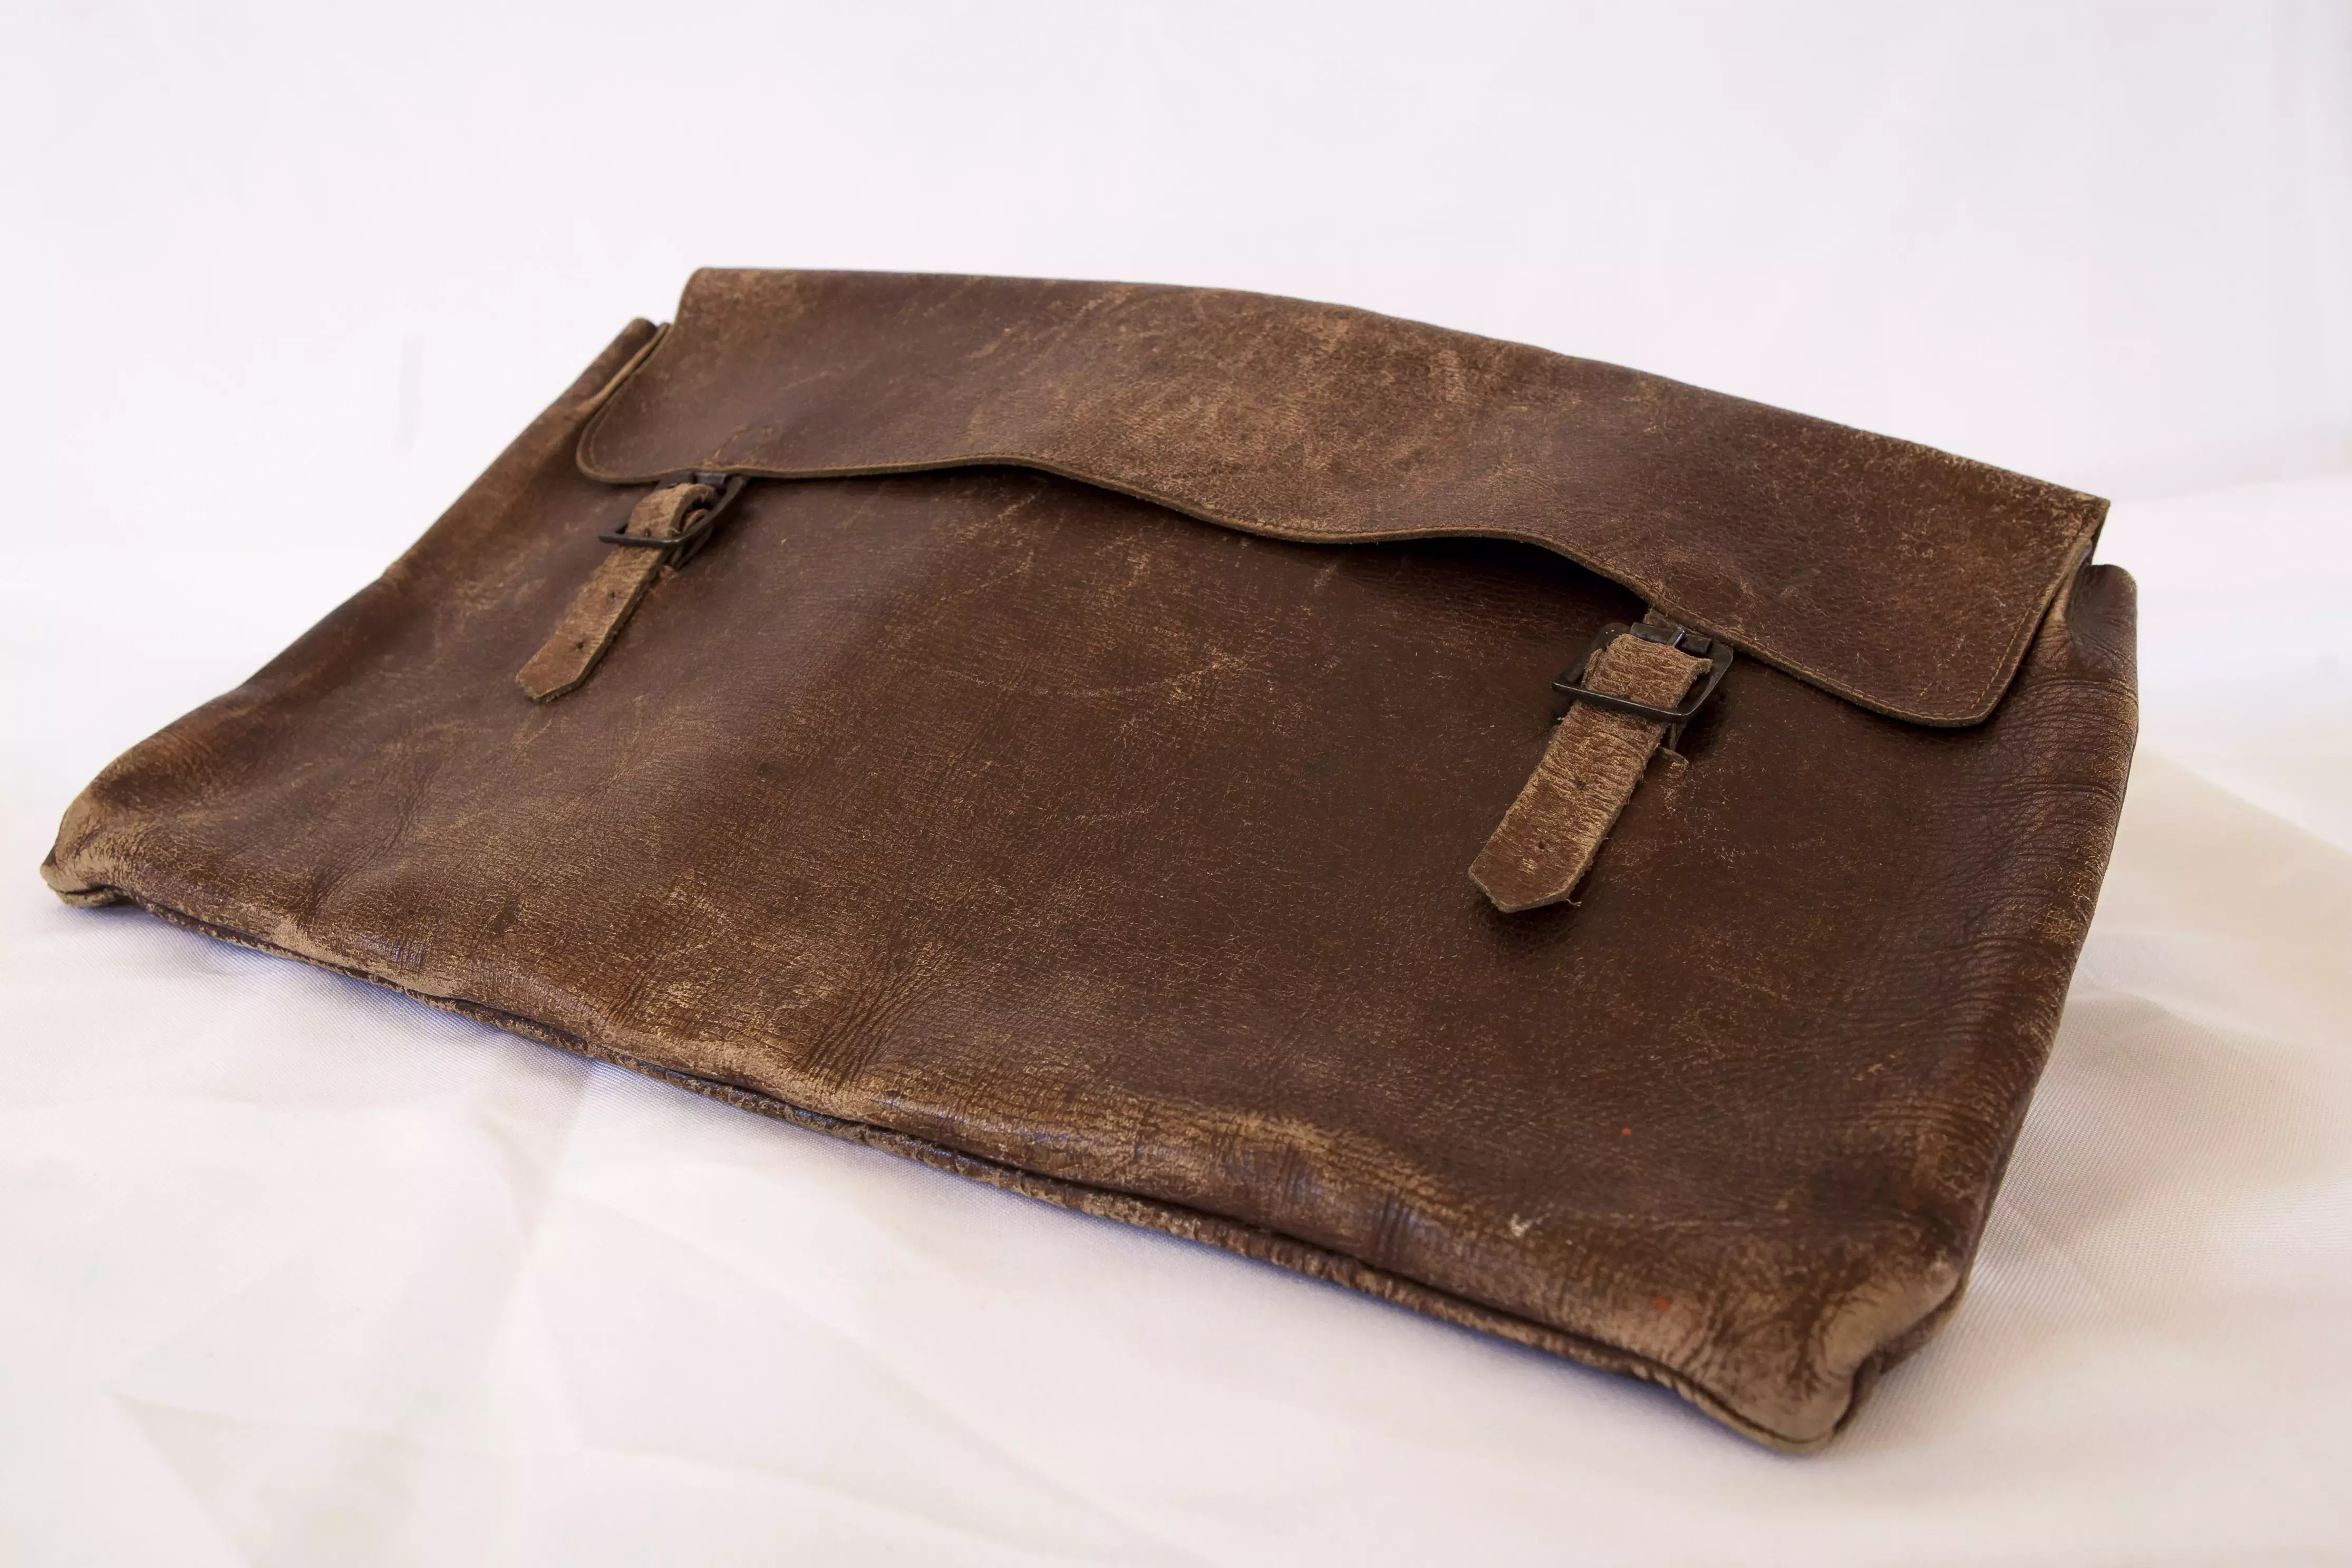 A brown leather satchel 